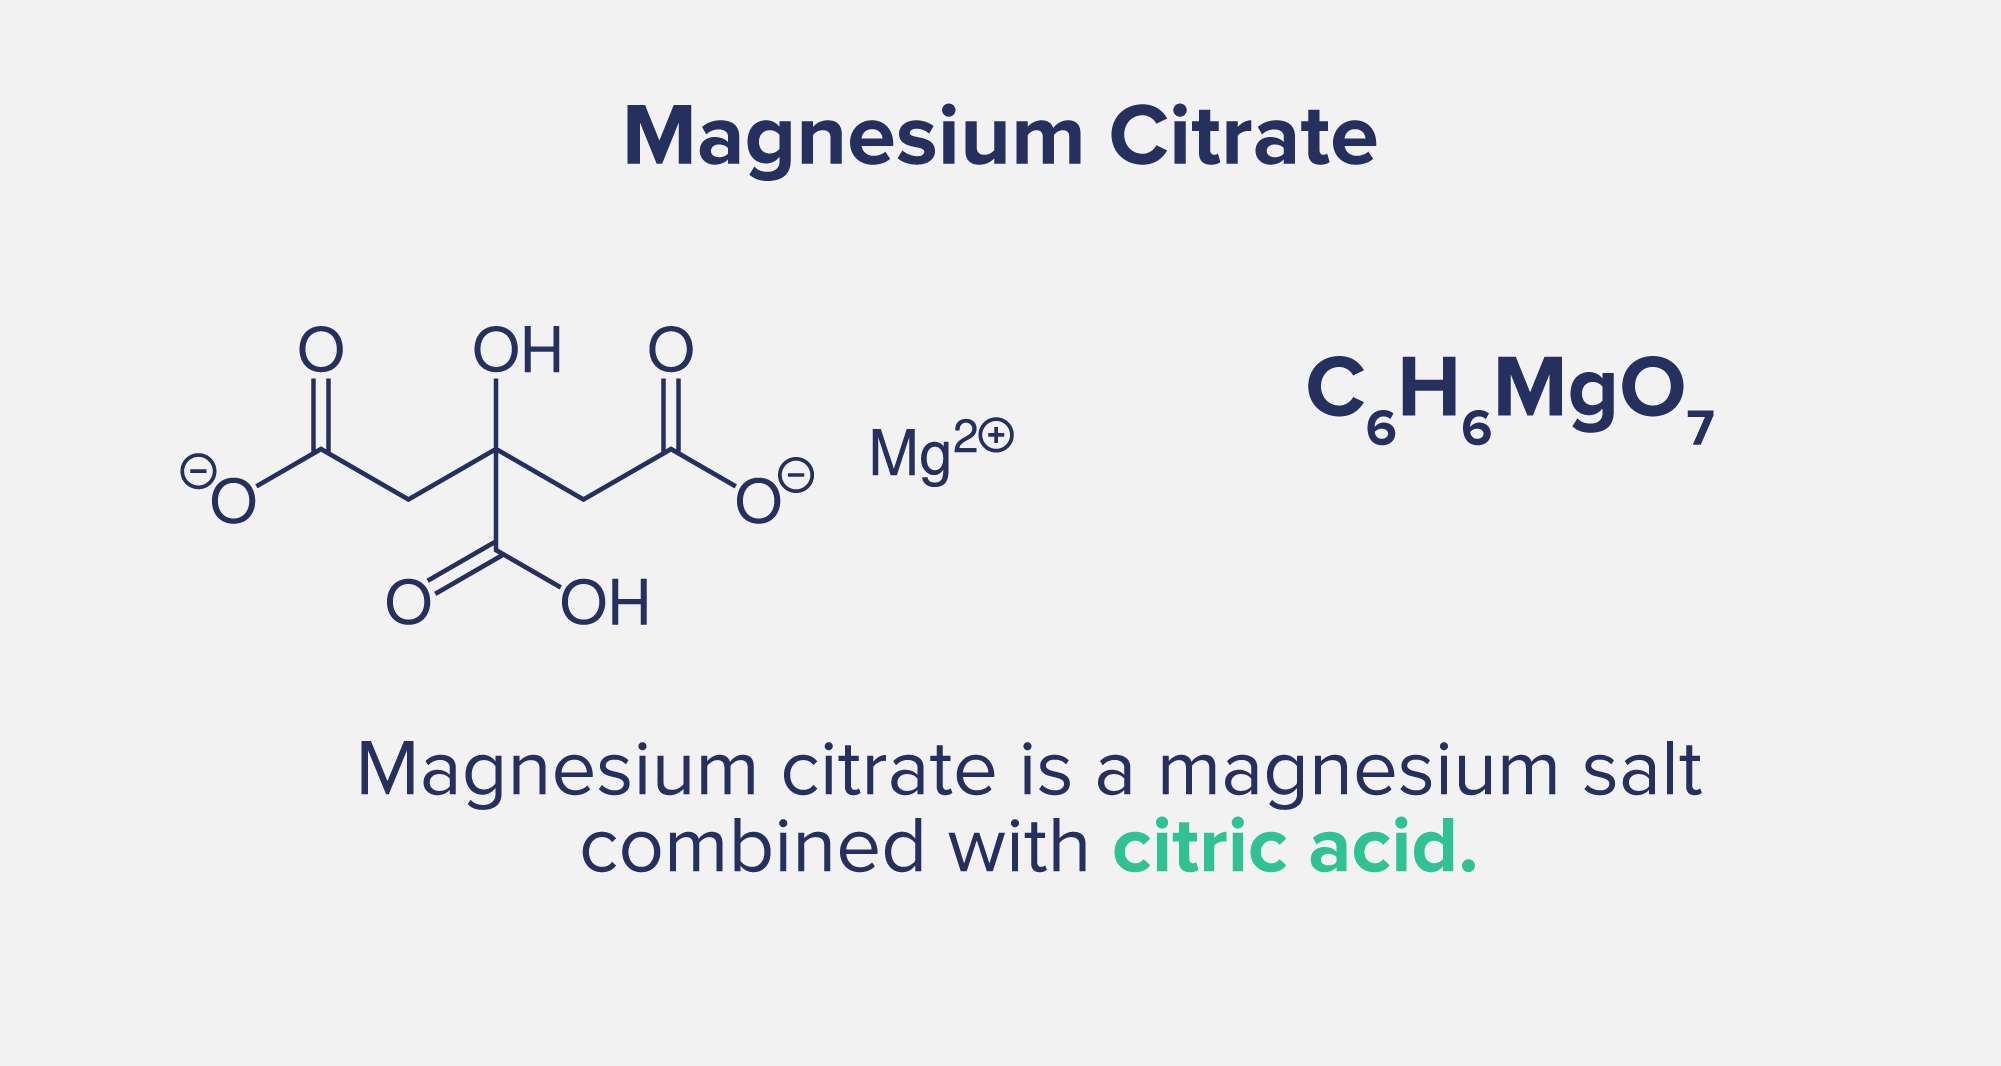 A graphic entitled "Magnesium Citrate" depicting the chemical formula and the following statement: Magnesium citrate is a magnesium salt combined with citric acid.